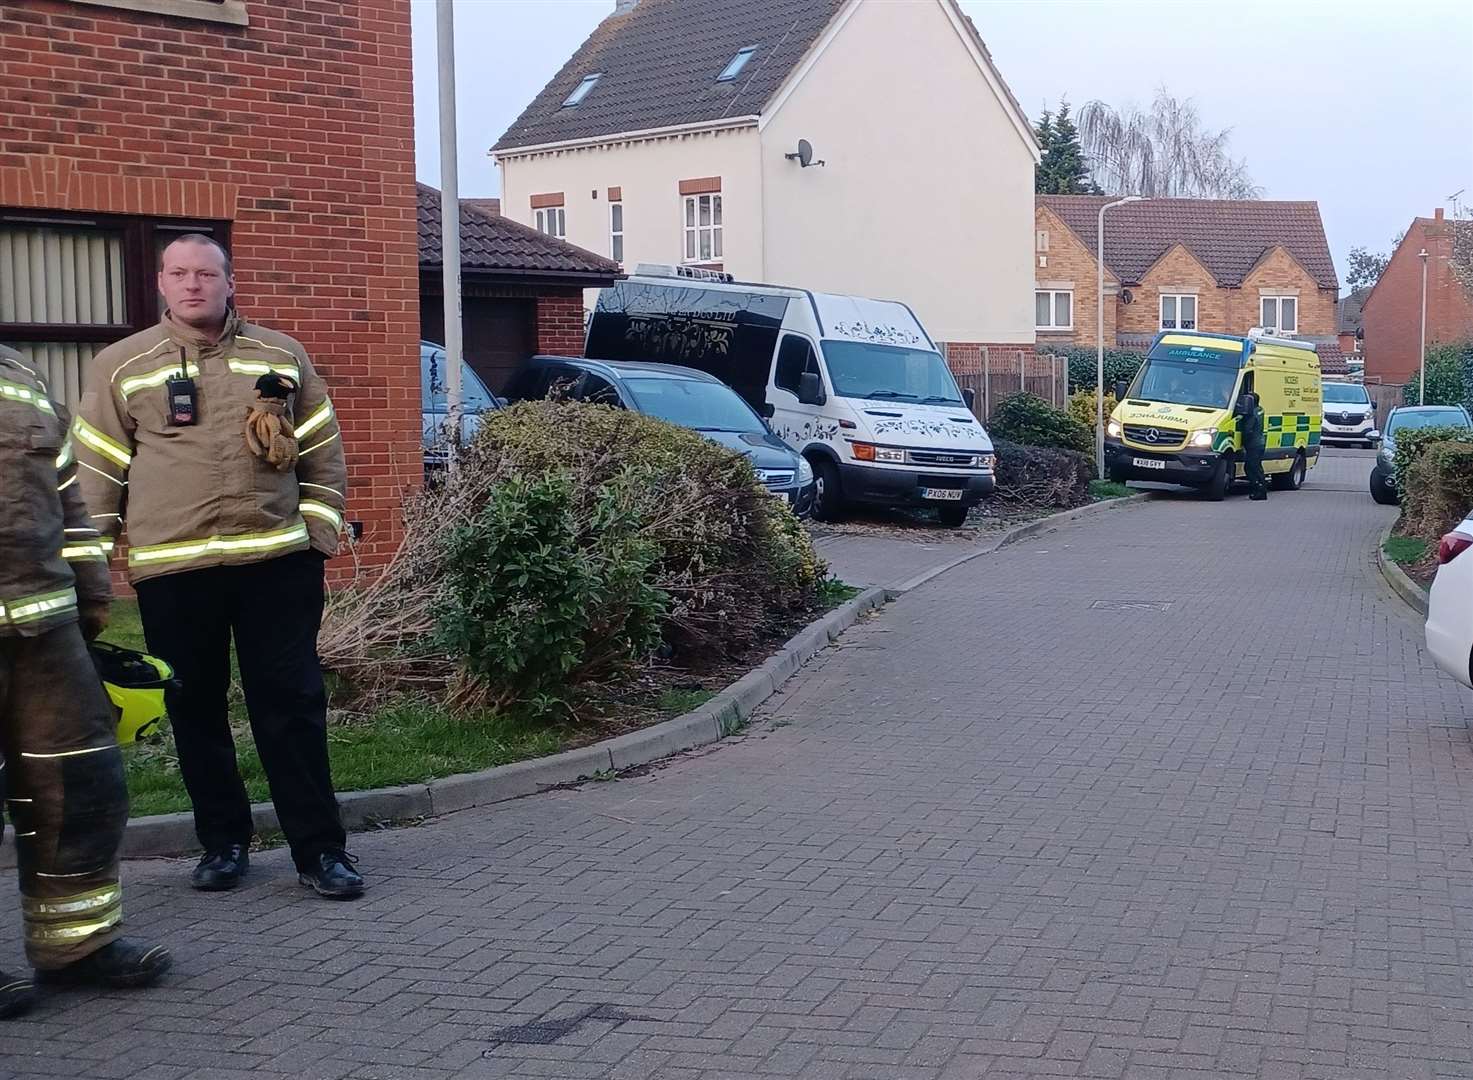 Emergency vehicles have been stationed in Sunstone Drive, Sittingbourne, since this morning